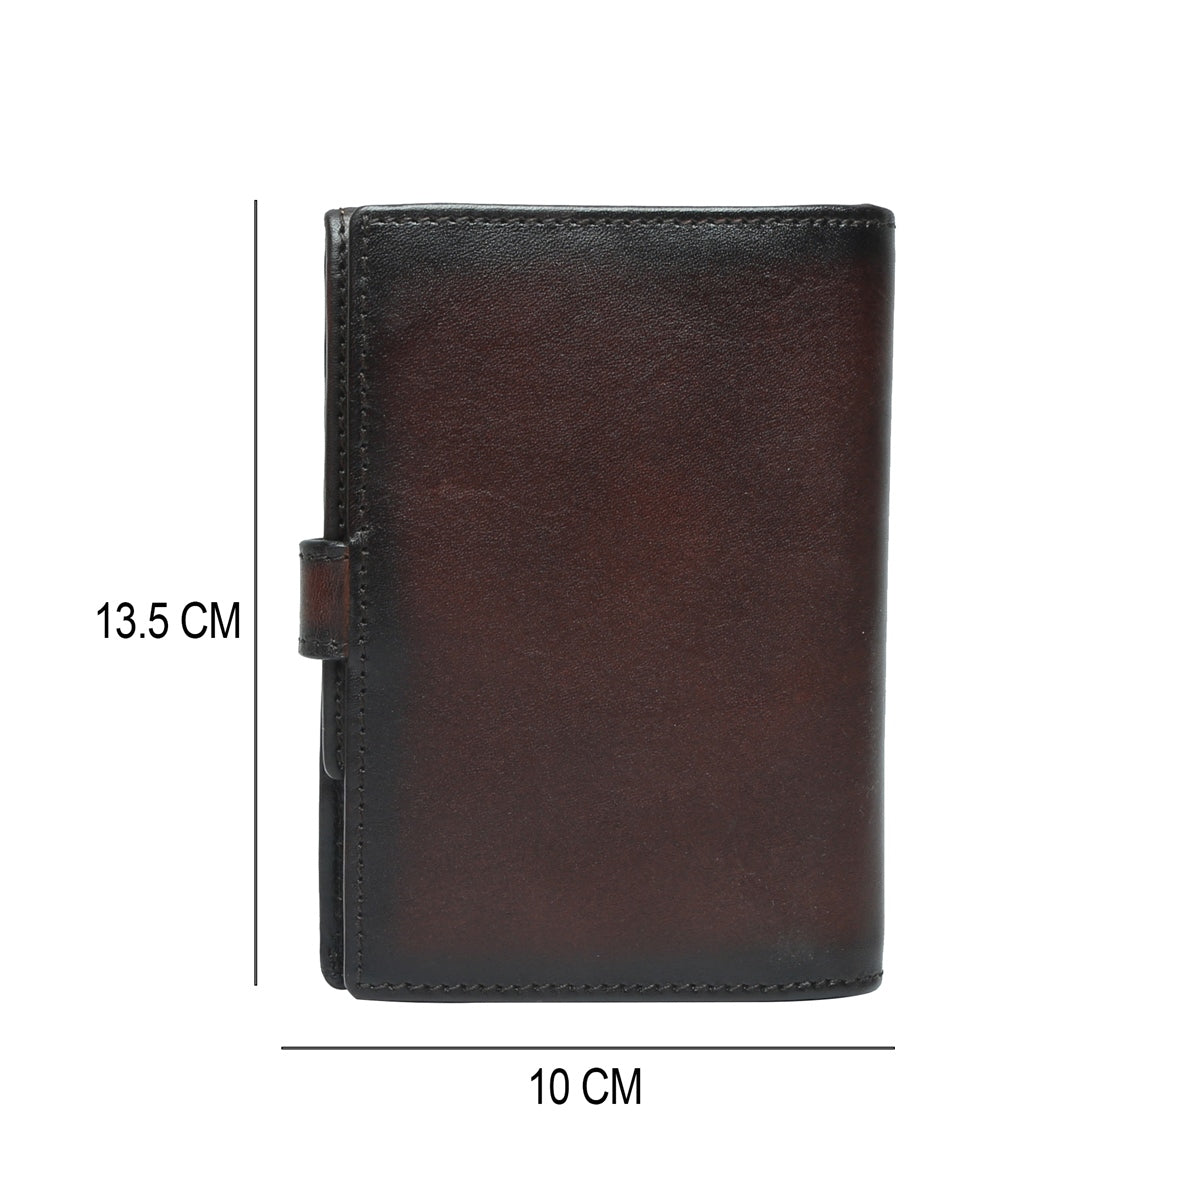 Brown Leather Passport Holder with Foldable Boarding Pass Pocket By Brune & Bareskin